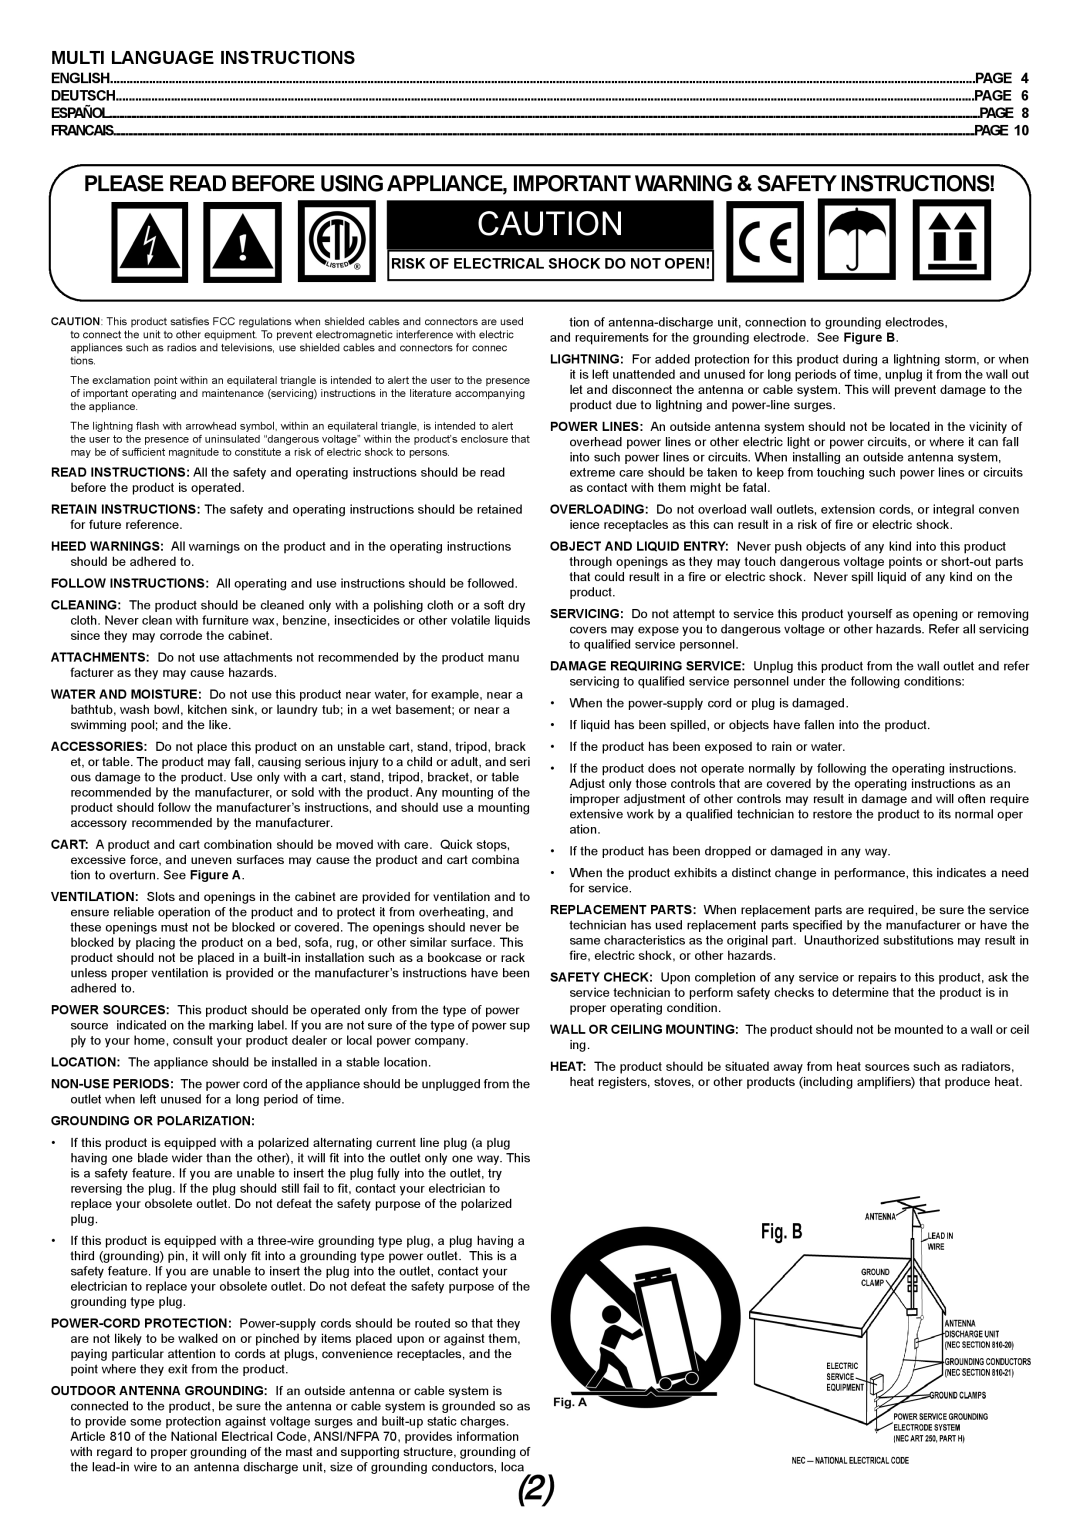 Gemini TT-01 manual Multi Language Instructions, Page, Risk Of Electrical Shock Do Not Open, Grounding Or Polarization 